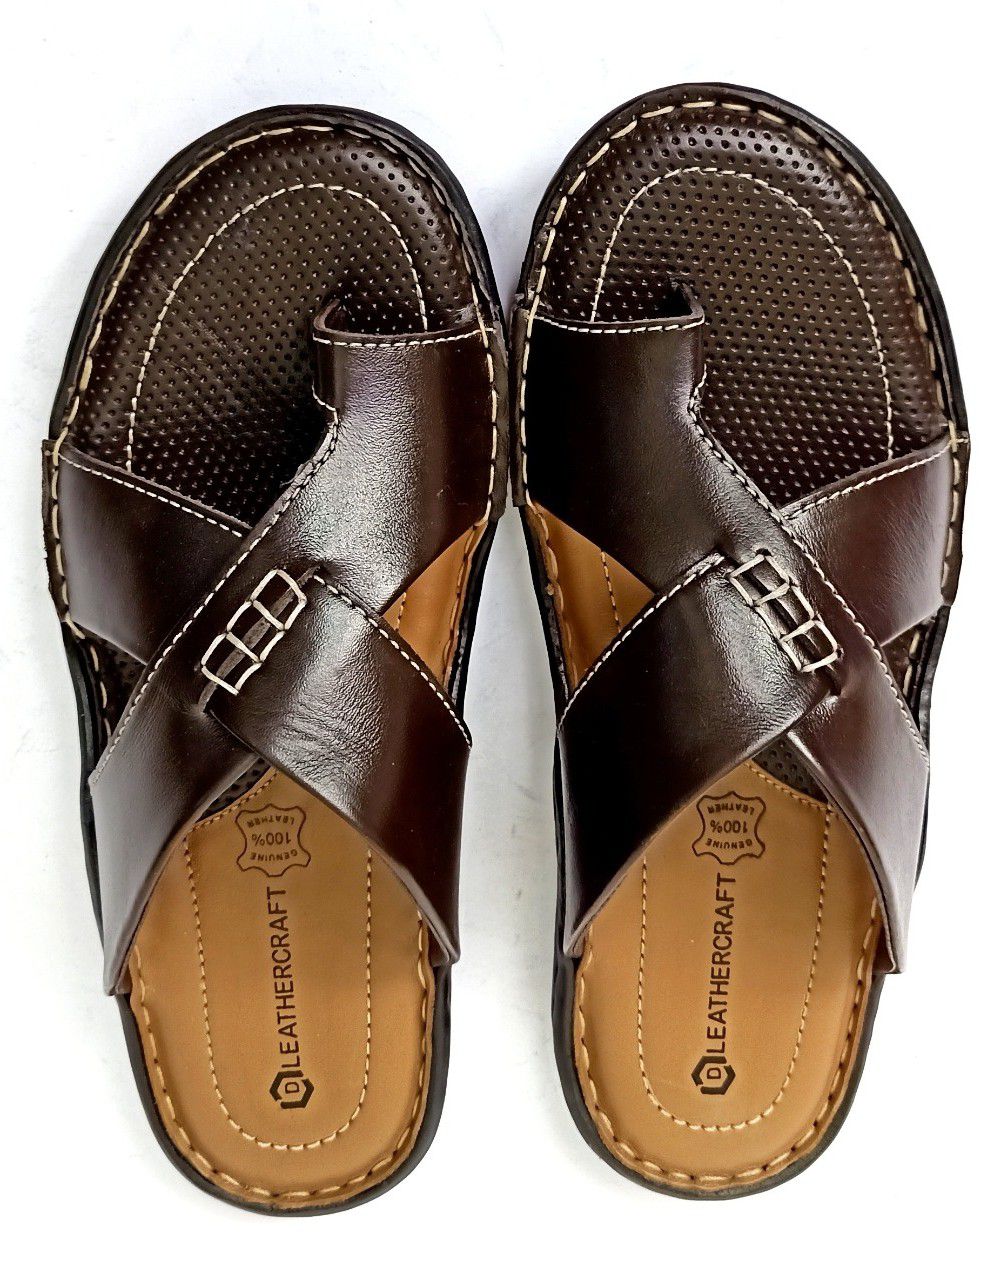 DLEATHERCRAFT Brown Leather Slippers Price in India- Buy DLEATHERCRAFT ...